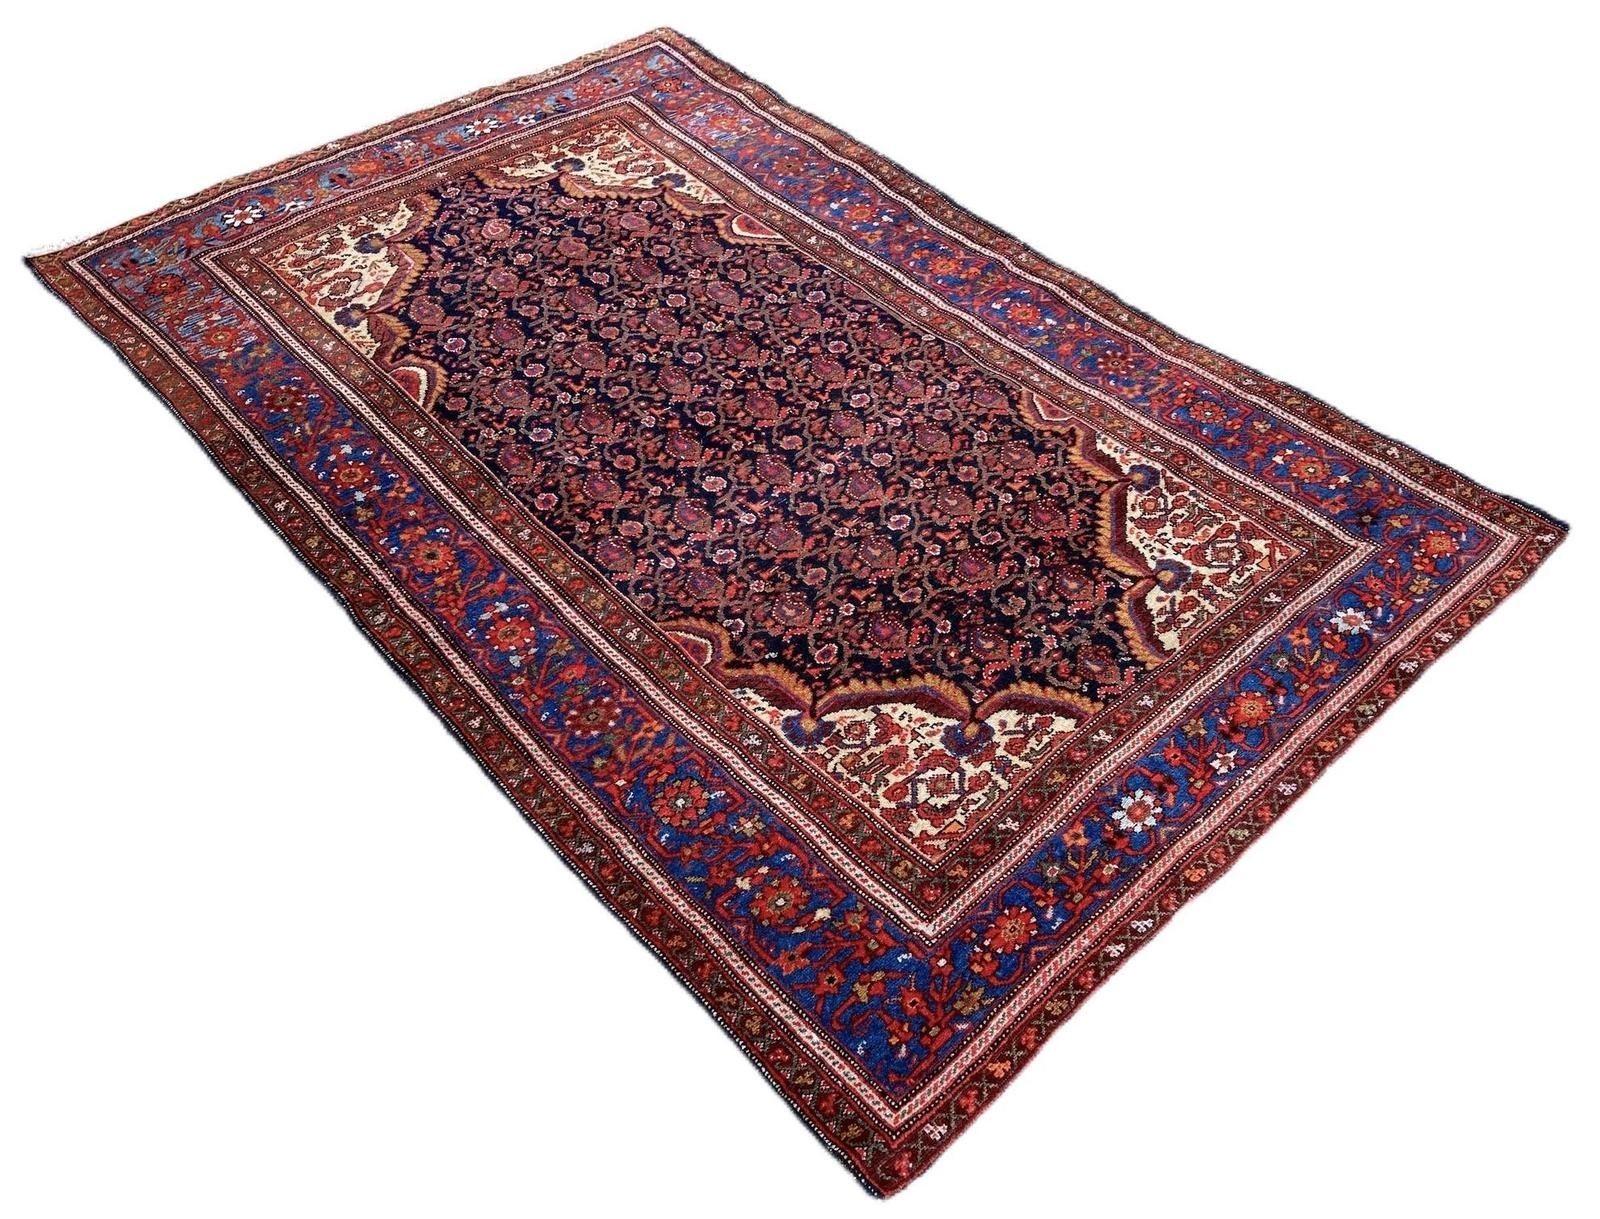 Antique Ferahan Rug 2.03m X 1.32m In Good Condition For Sale In St. Albans, GB